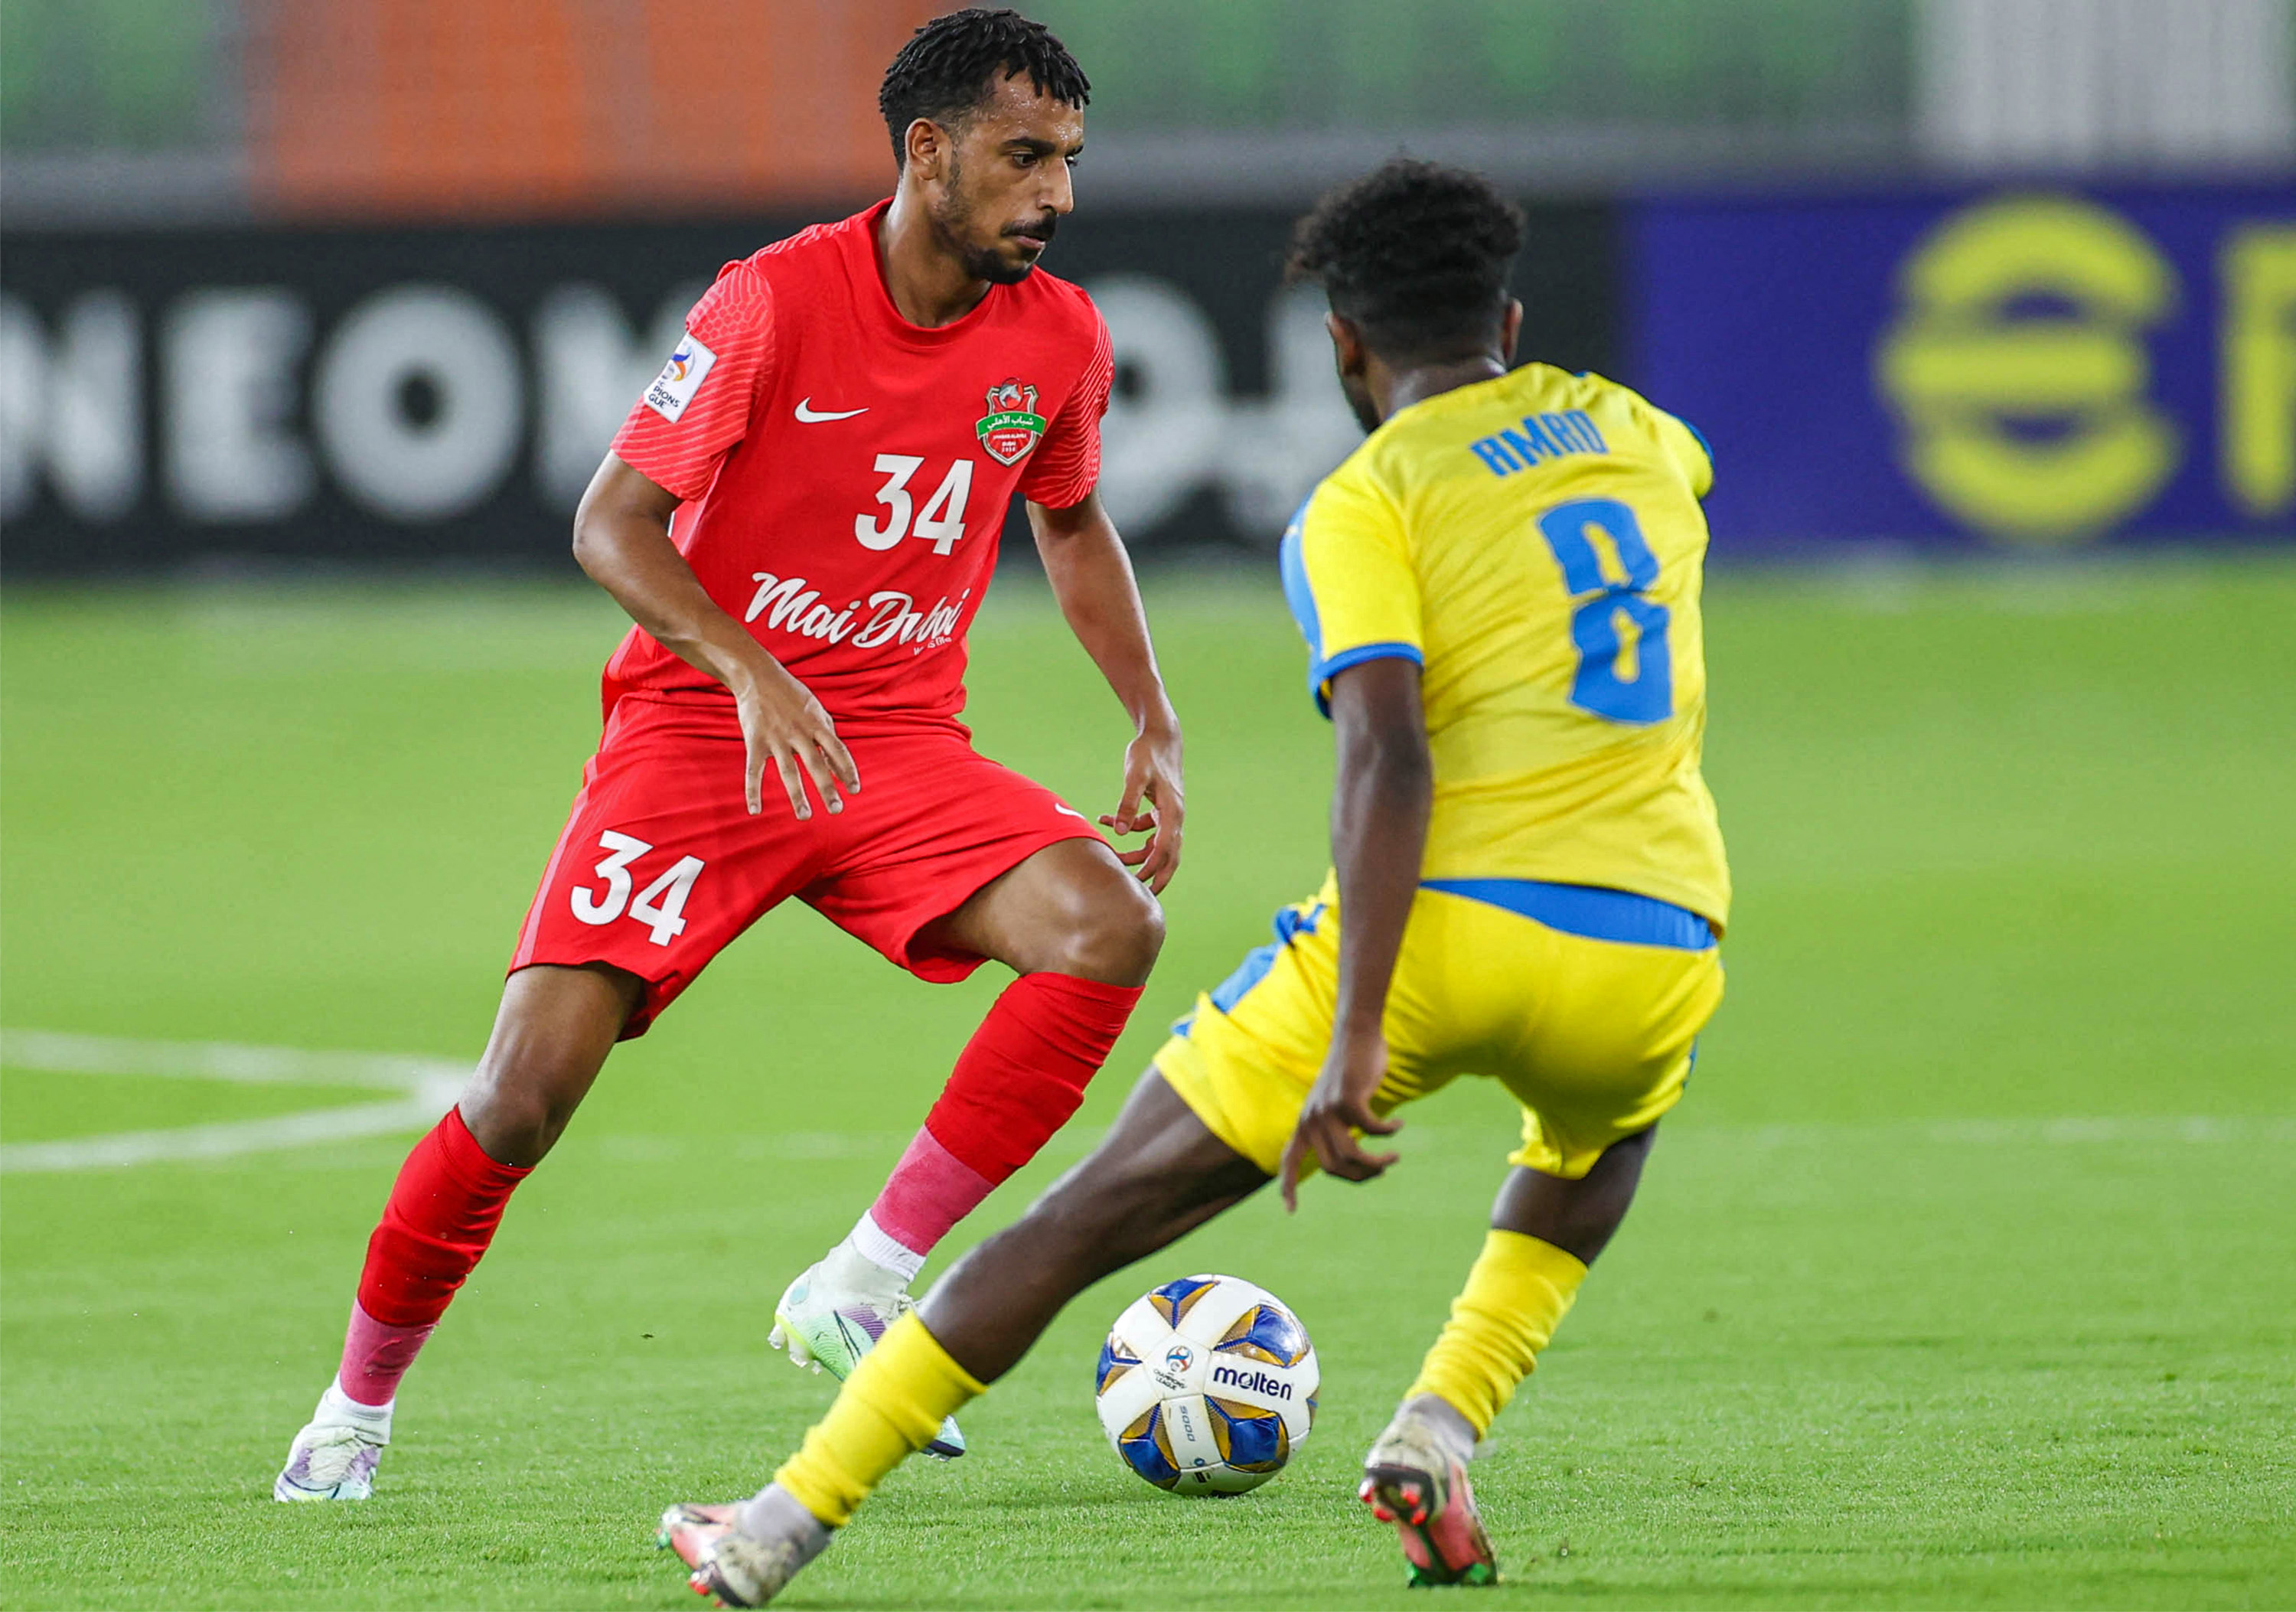 Mahdi Ali says momentum with Shabab Al Ahli as they face Ahal in Asian  Champions League